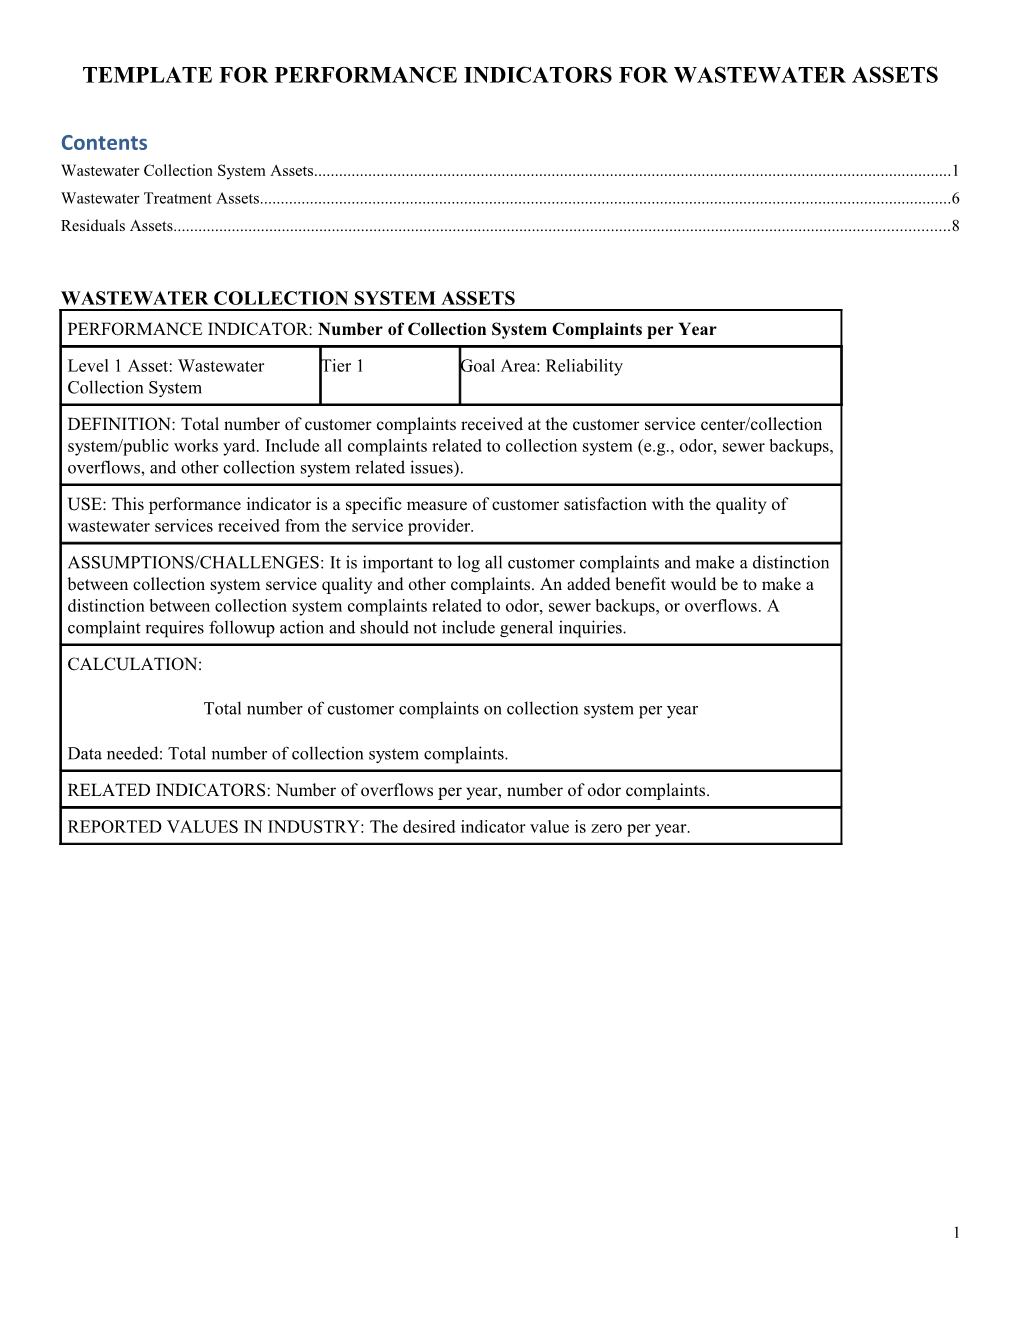 4187 Final Report Template Pis Wastewater Assets